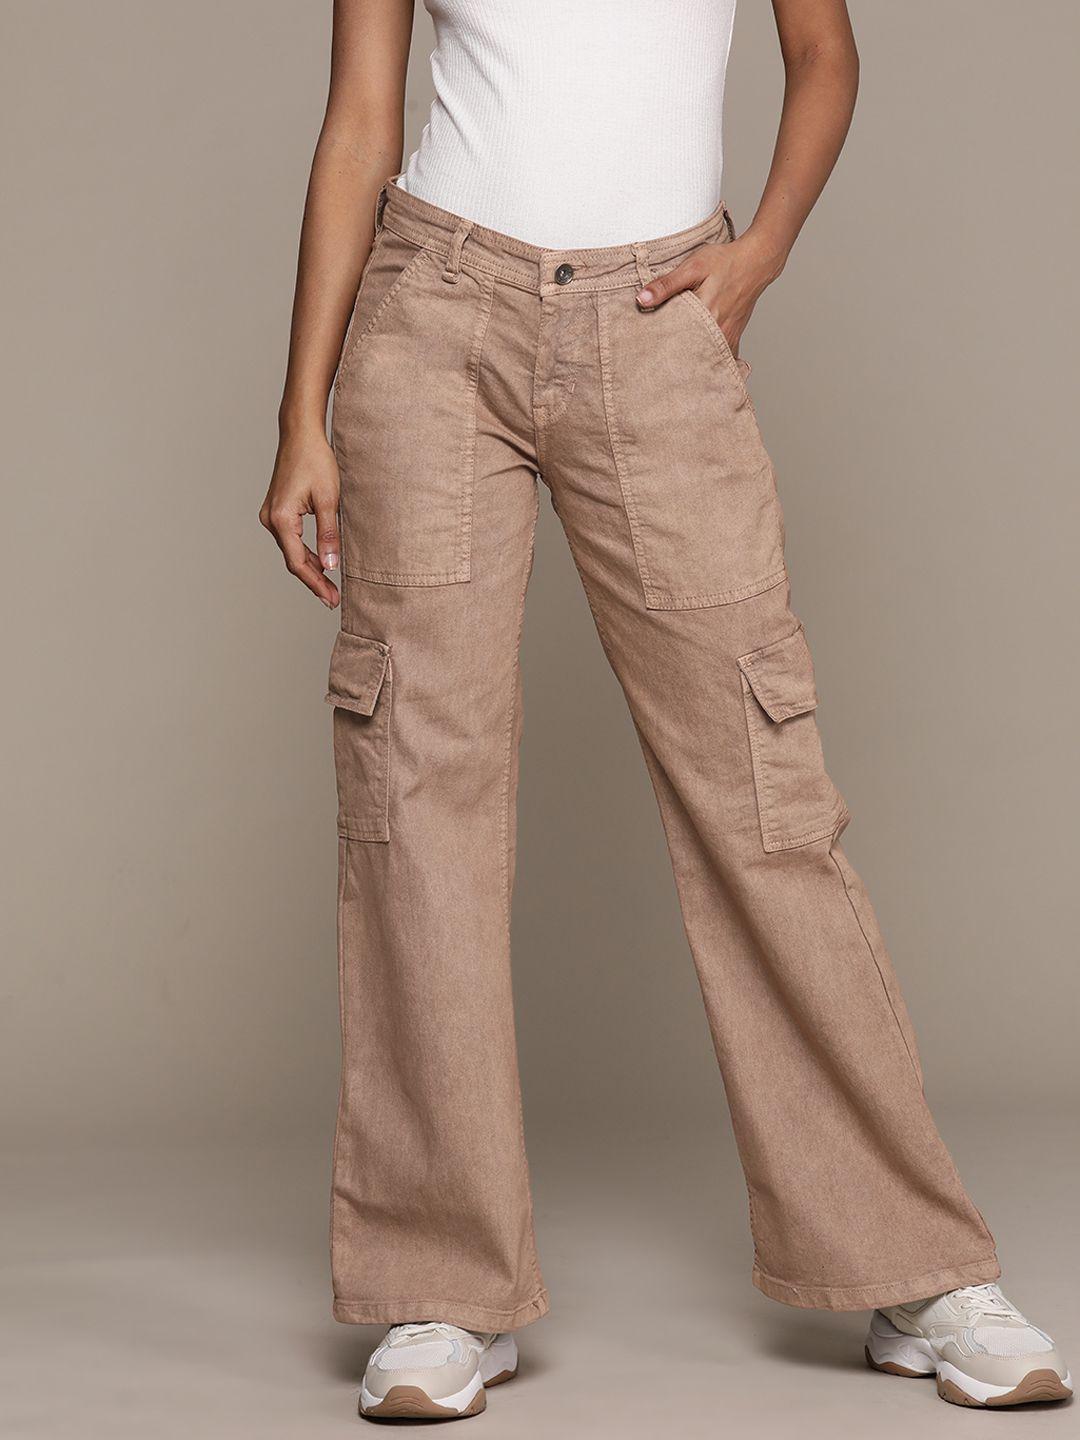 The Roadster Lifestyle Co. Women Cargo Fit Stretchable Jeans